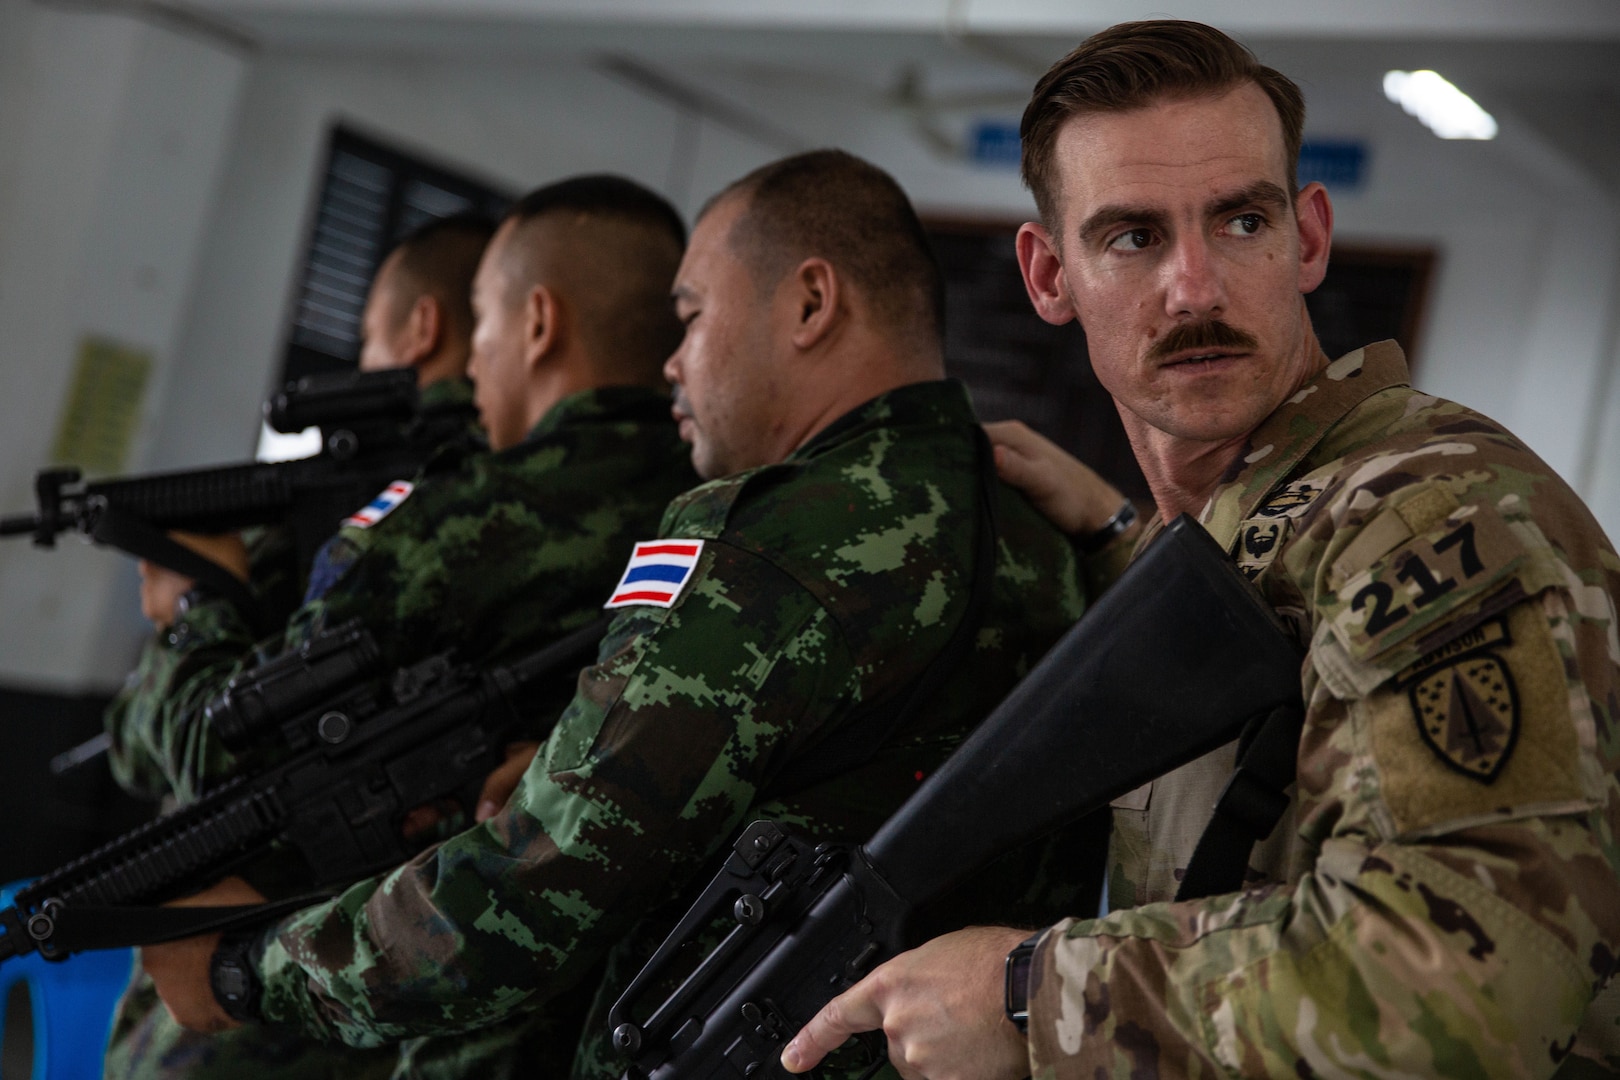 Sgt. 1st Class Justin Babb takes part in close quarters battle rehearsals with members of the Royal Thai Army. Babb is part of an SFAB Team assigned to Force Package 23-1, the 5th SFAB's forward-deployed element.